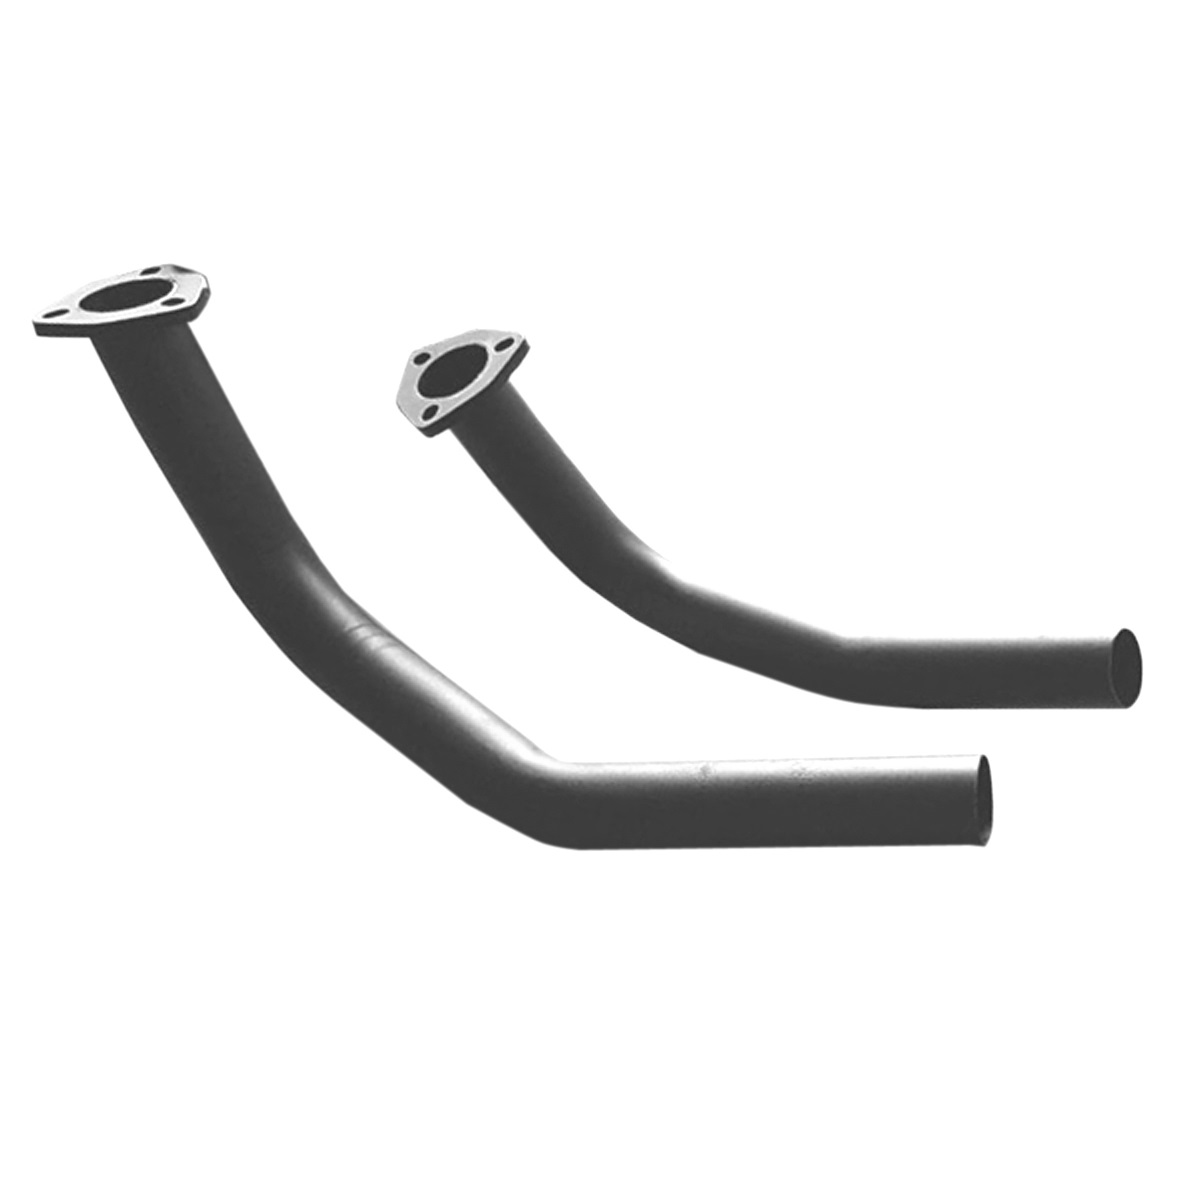 FRONT PIPES PAIR MISTRAL 3.7 - 4.0